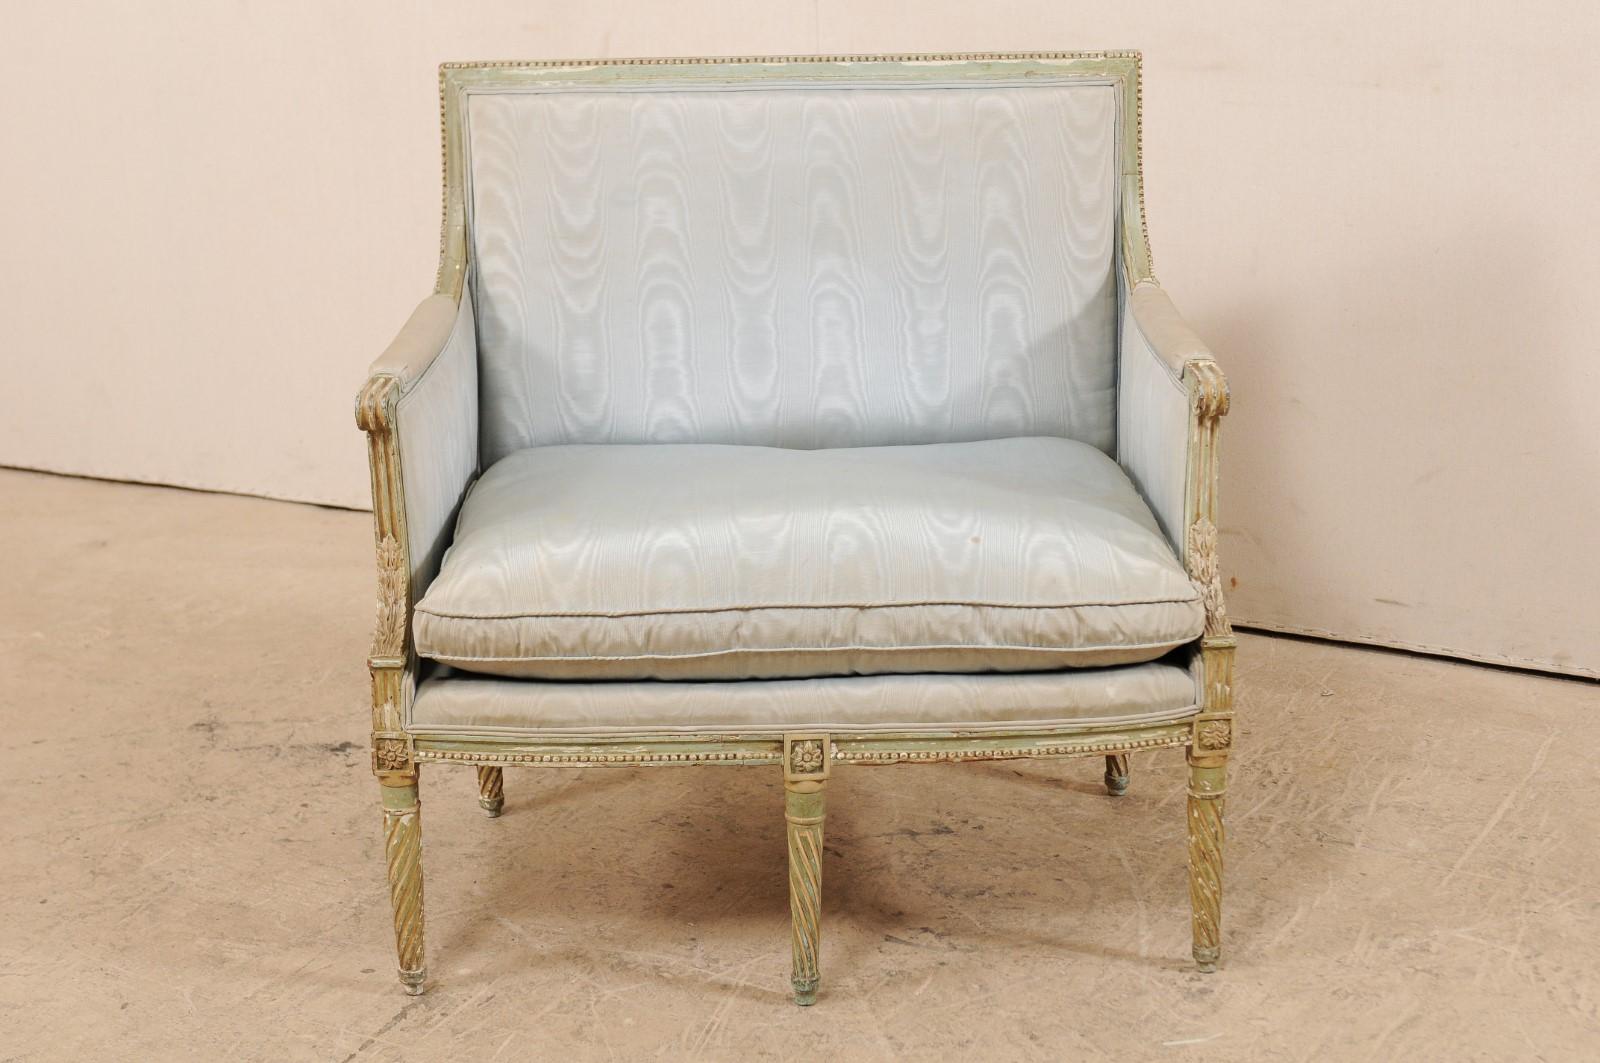 A French Louis XVI style marquise wide seat chair from the late 19th century. This antique Louis XVI style chair from France, with its original paint, features a straight crest rail along the back with carved bead trim, upholstered manchette arms,